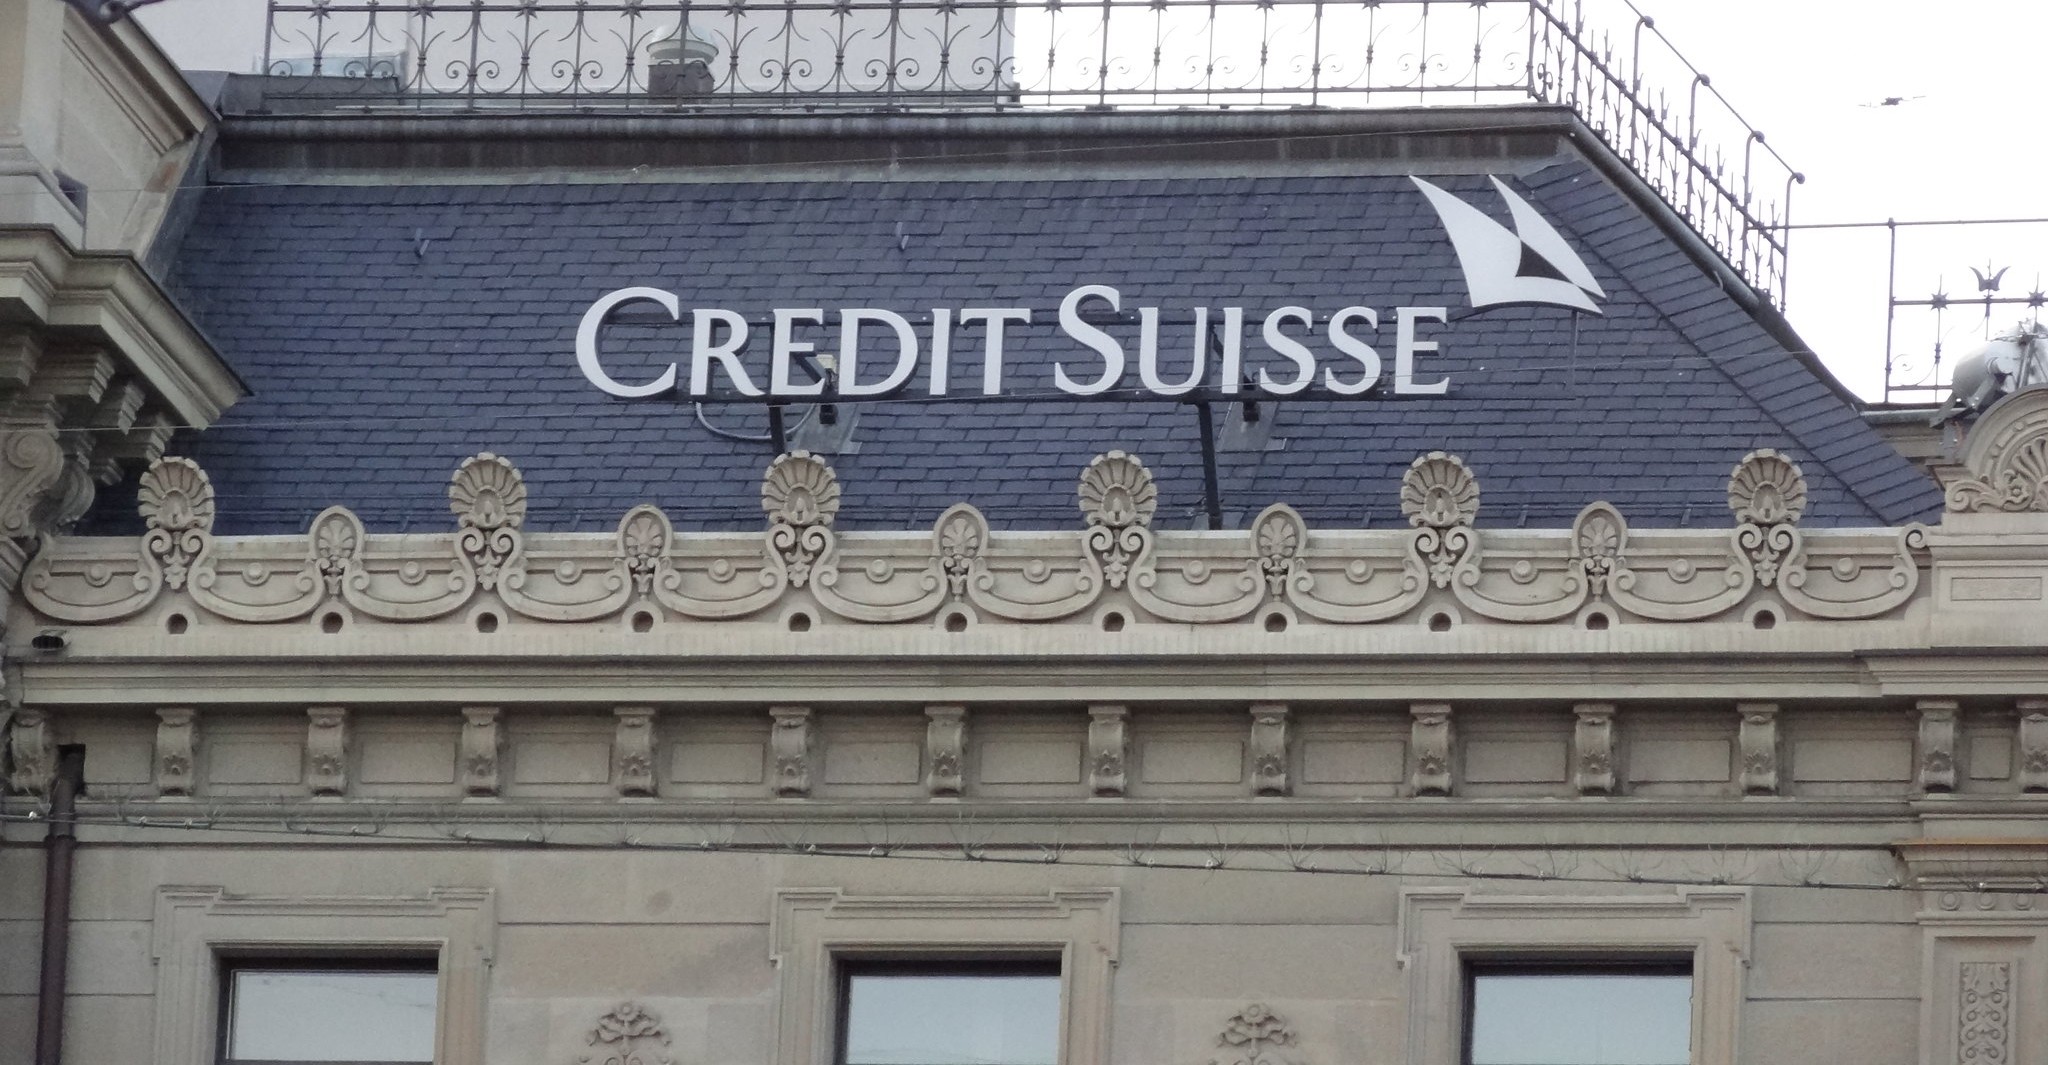 Credit Suisse Image investing academy pro Flickr